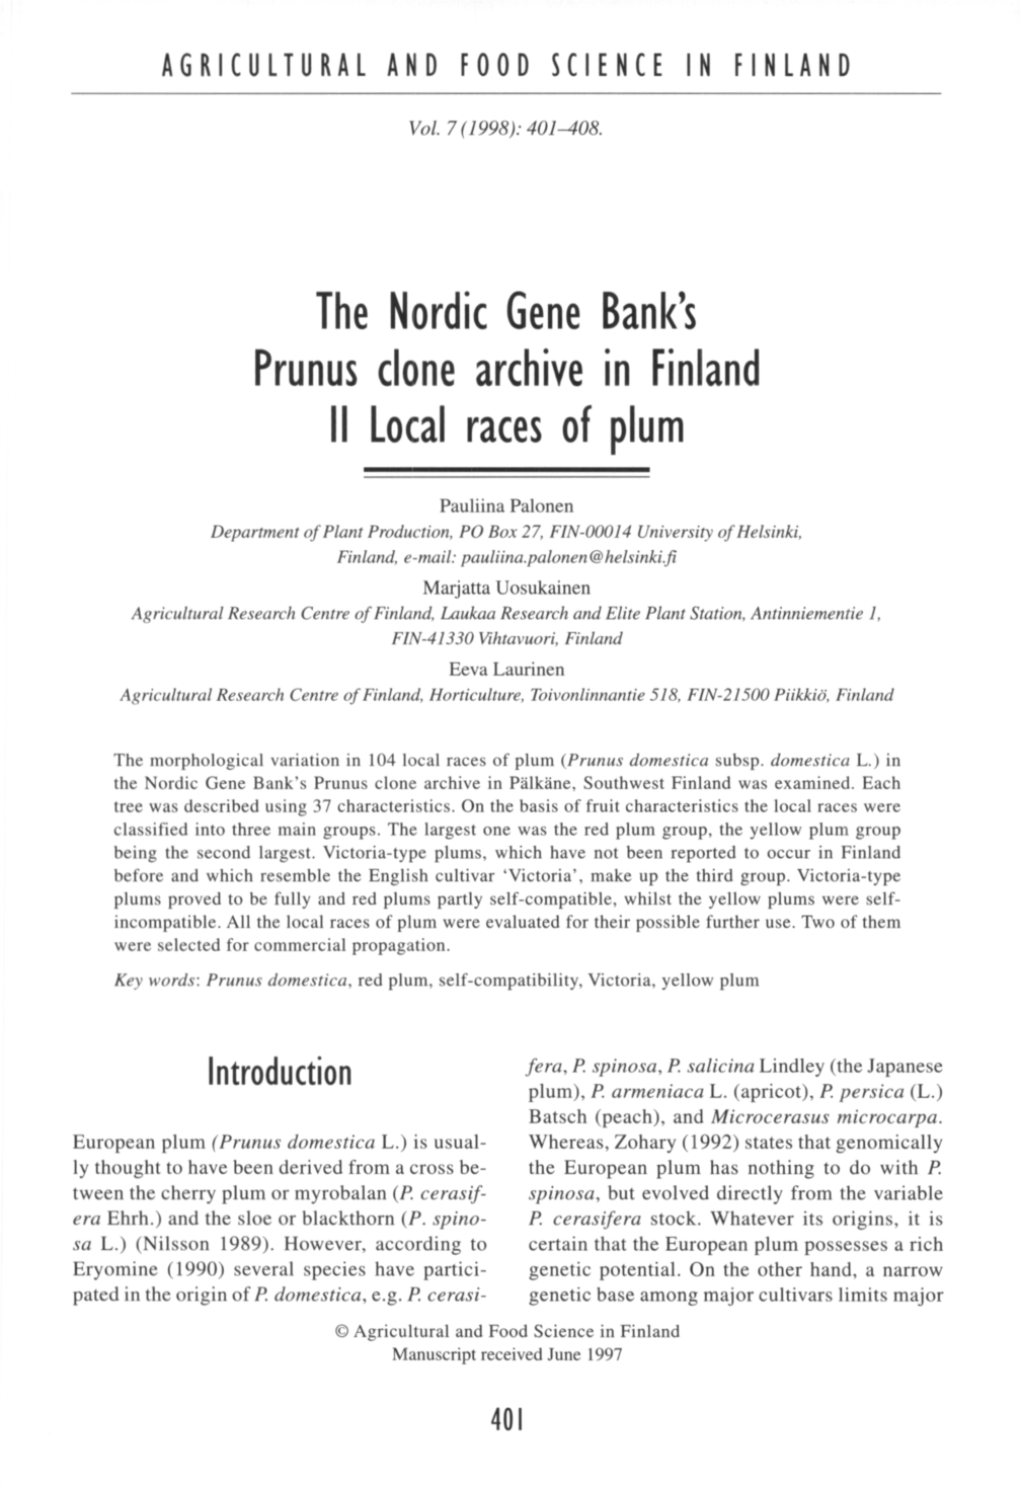 The Nordic Gene Bank's Archive in Finland II Local Races of Plum